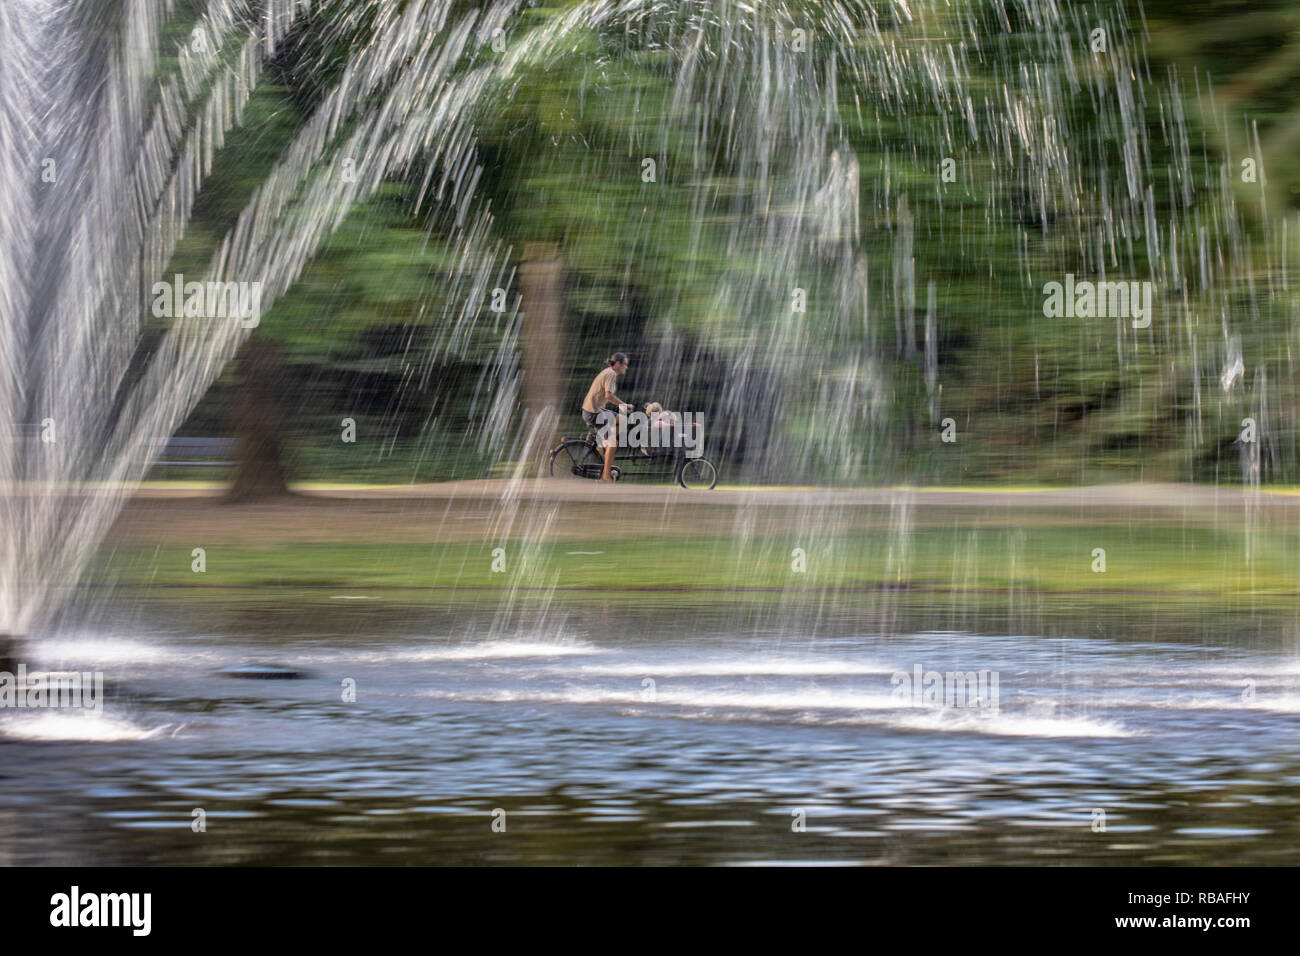 The Netherlands, Amsterdam. Vondelpark. Parent brings his children to school by bicycle or cargo bike. Fountain. Blurred motion. Stock Photo